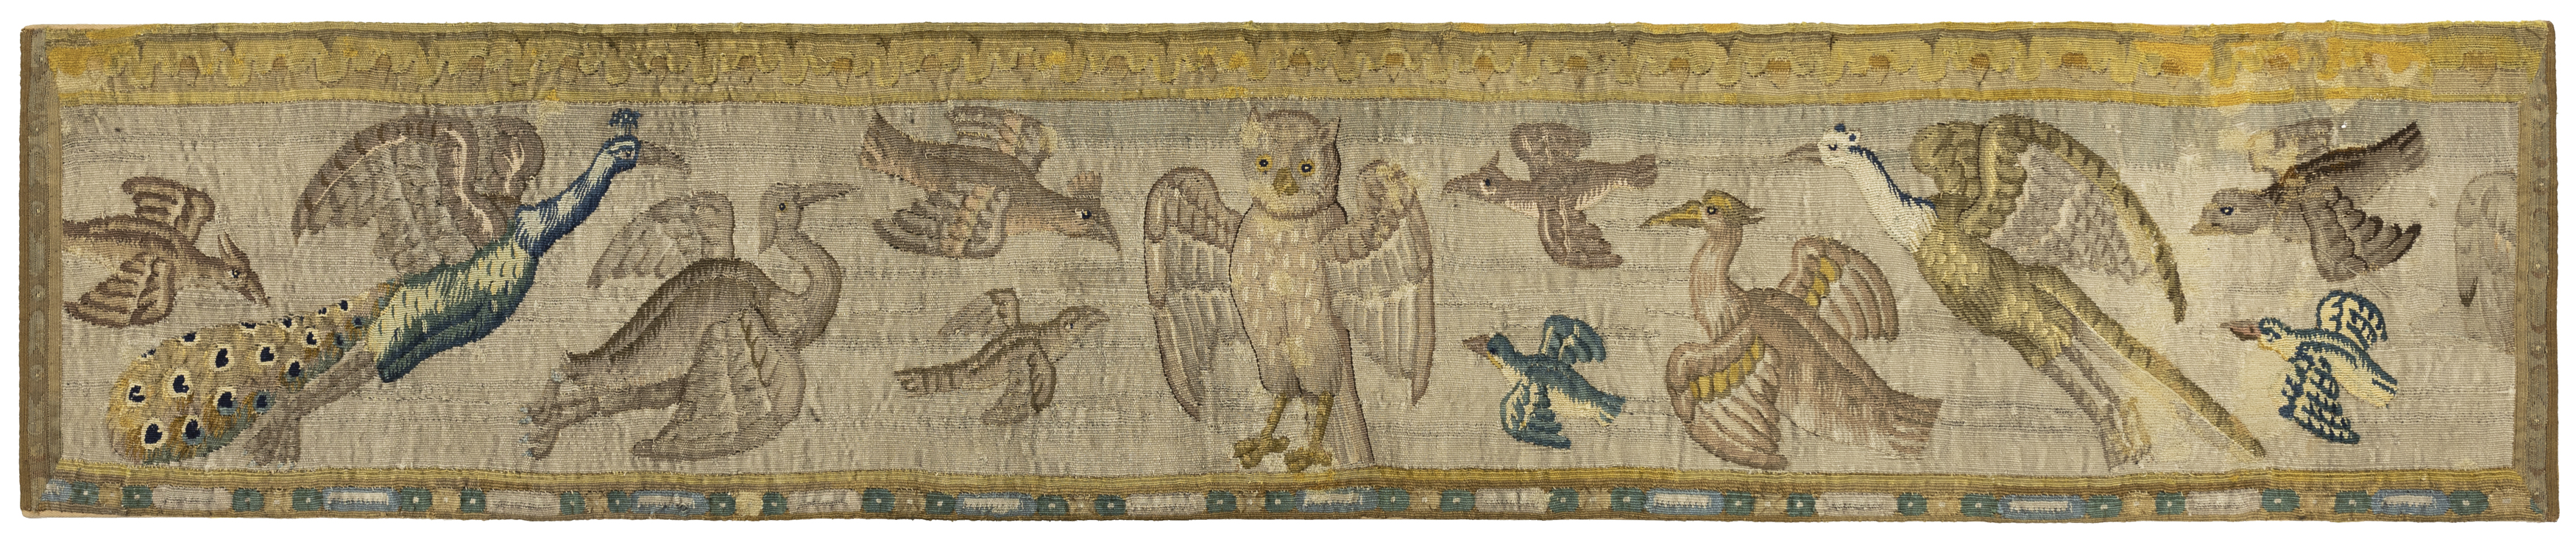 Three Flemish tapestry border fragments, 17th century, Woven in wools and silks, depicting flying... - Image 2 of 4